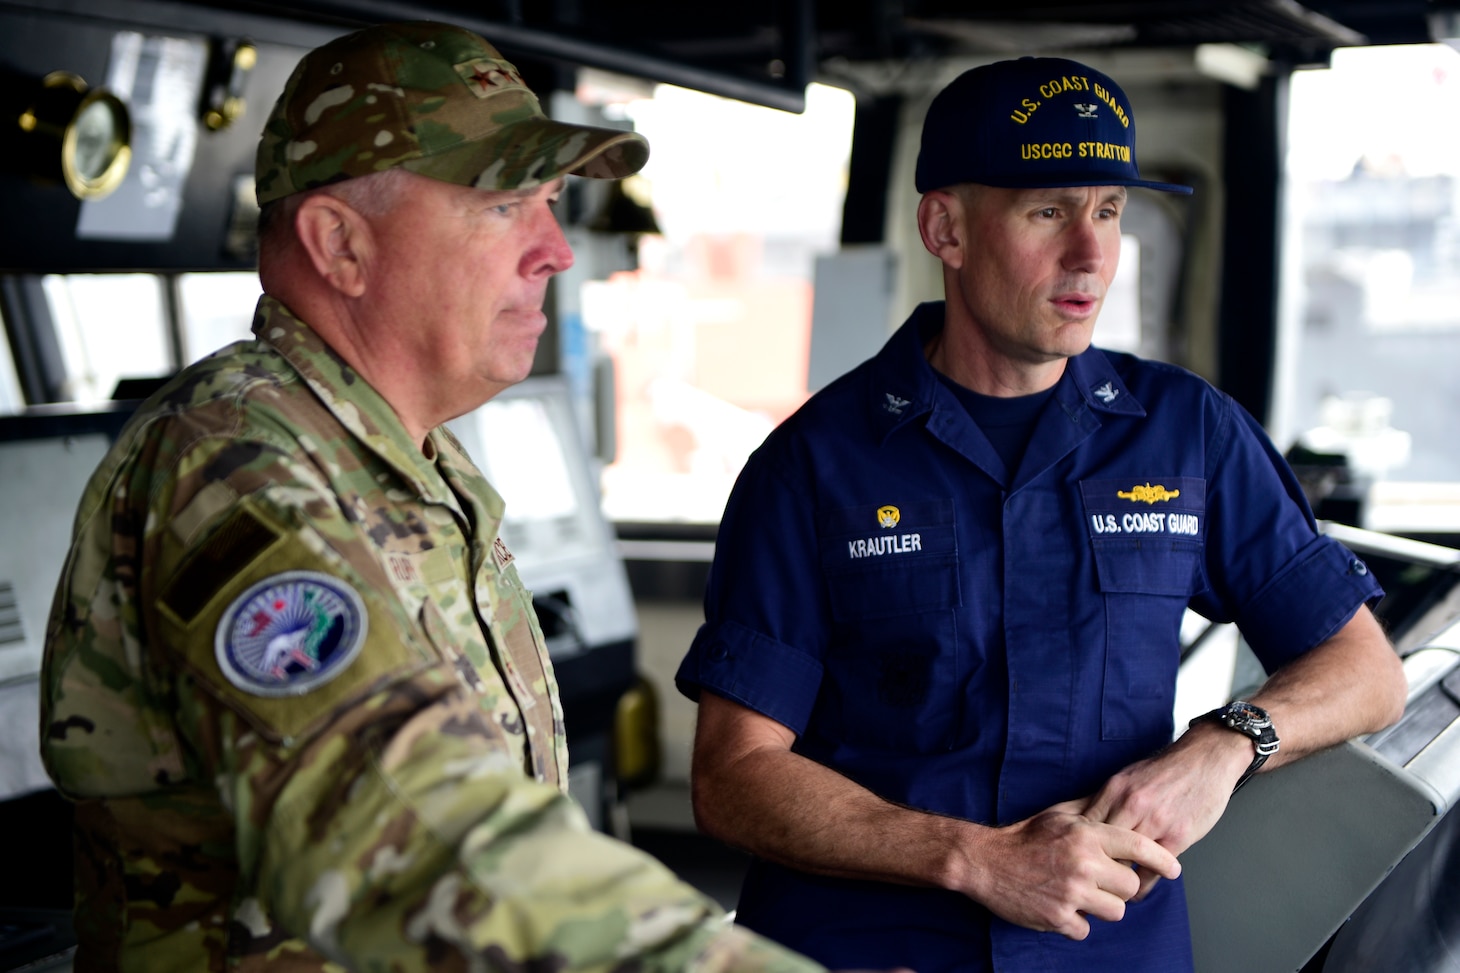 Lt. Gen. Ricky N. Rupp, commander, U.S. Forces Japan, visits Coast Guard Cutter Stratton (752), at U.S. Fleet Activities, Yokosuka, Japan, April 30, 2023. While on a Western Pacific patrol, the Stratton made a port call in Yokosuka to engage in professional exchanges and maritime collaborative engagements with partner nations during the deployment, which will strengthen relationships with ally and partner coast guards and navies throughout the Indo-Pacific.